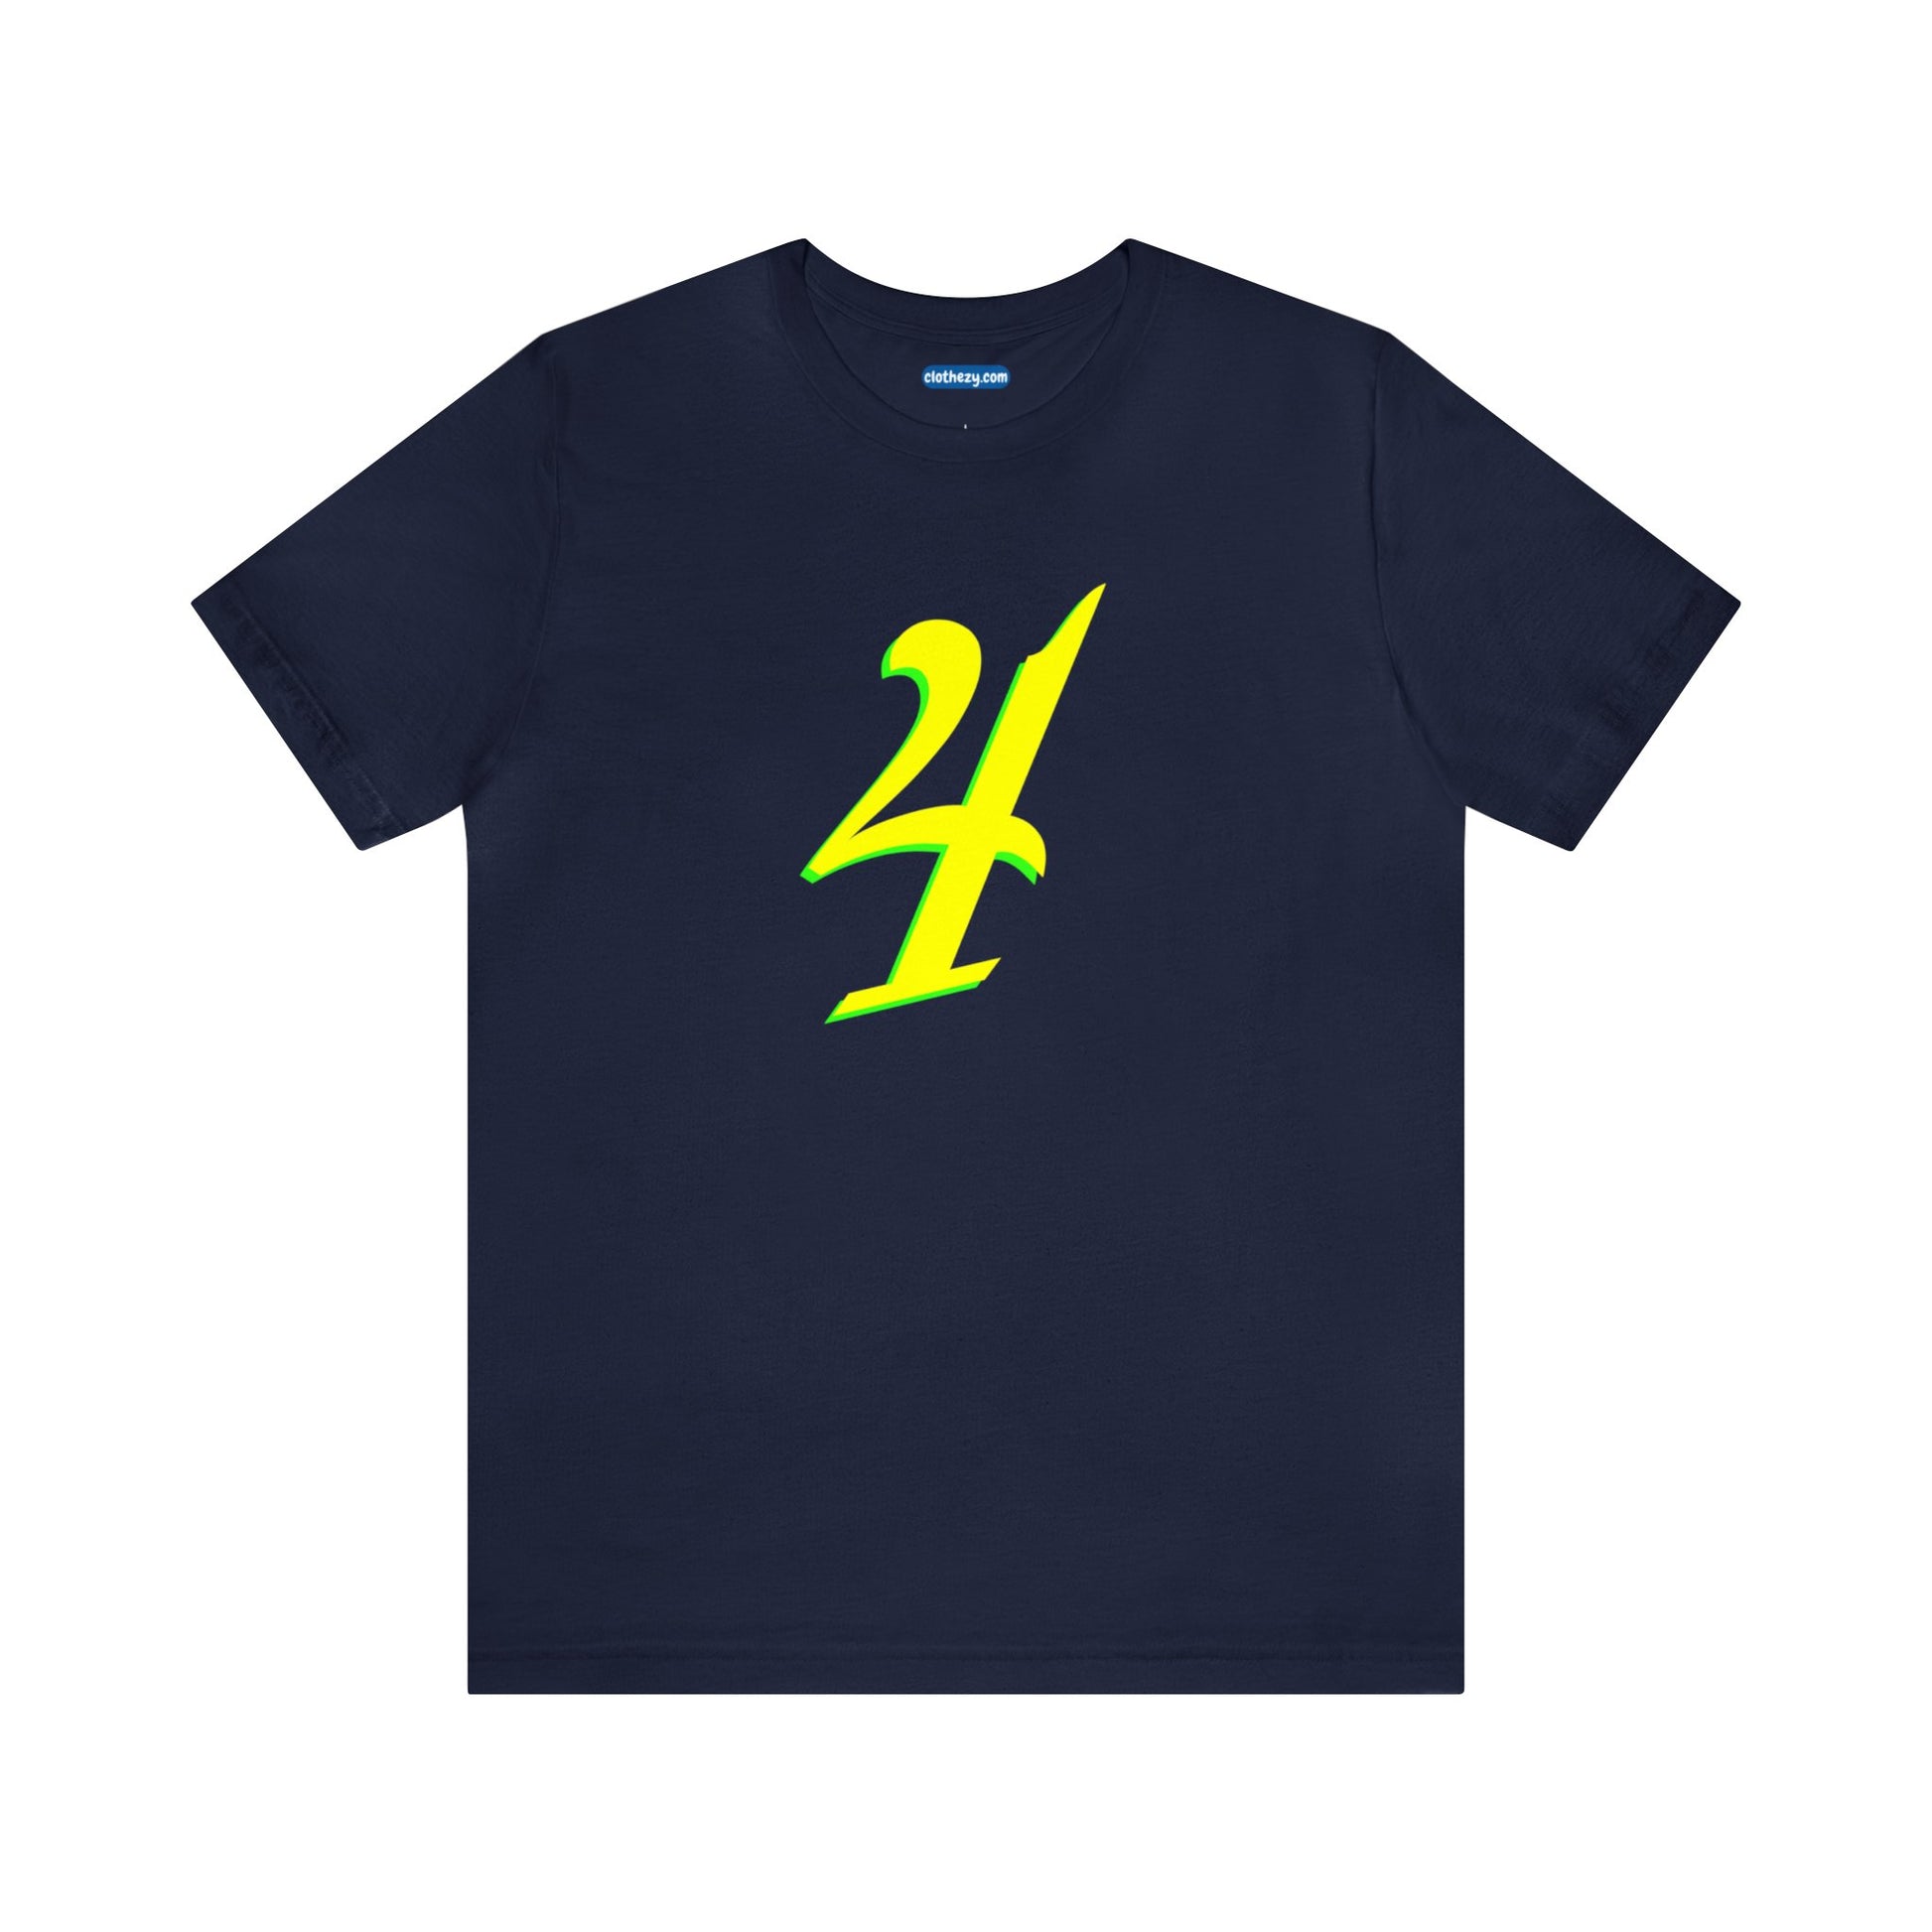 Number 4 Design - Soft Cotton Tee for birthdays and celebrations, Gift for friends and family, Multiple Options by clothezy.com in Navy Size Small - Buy Now